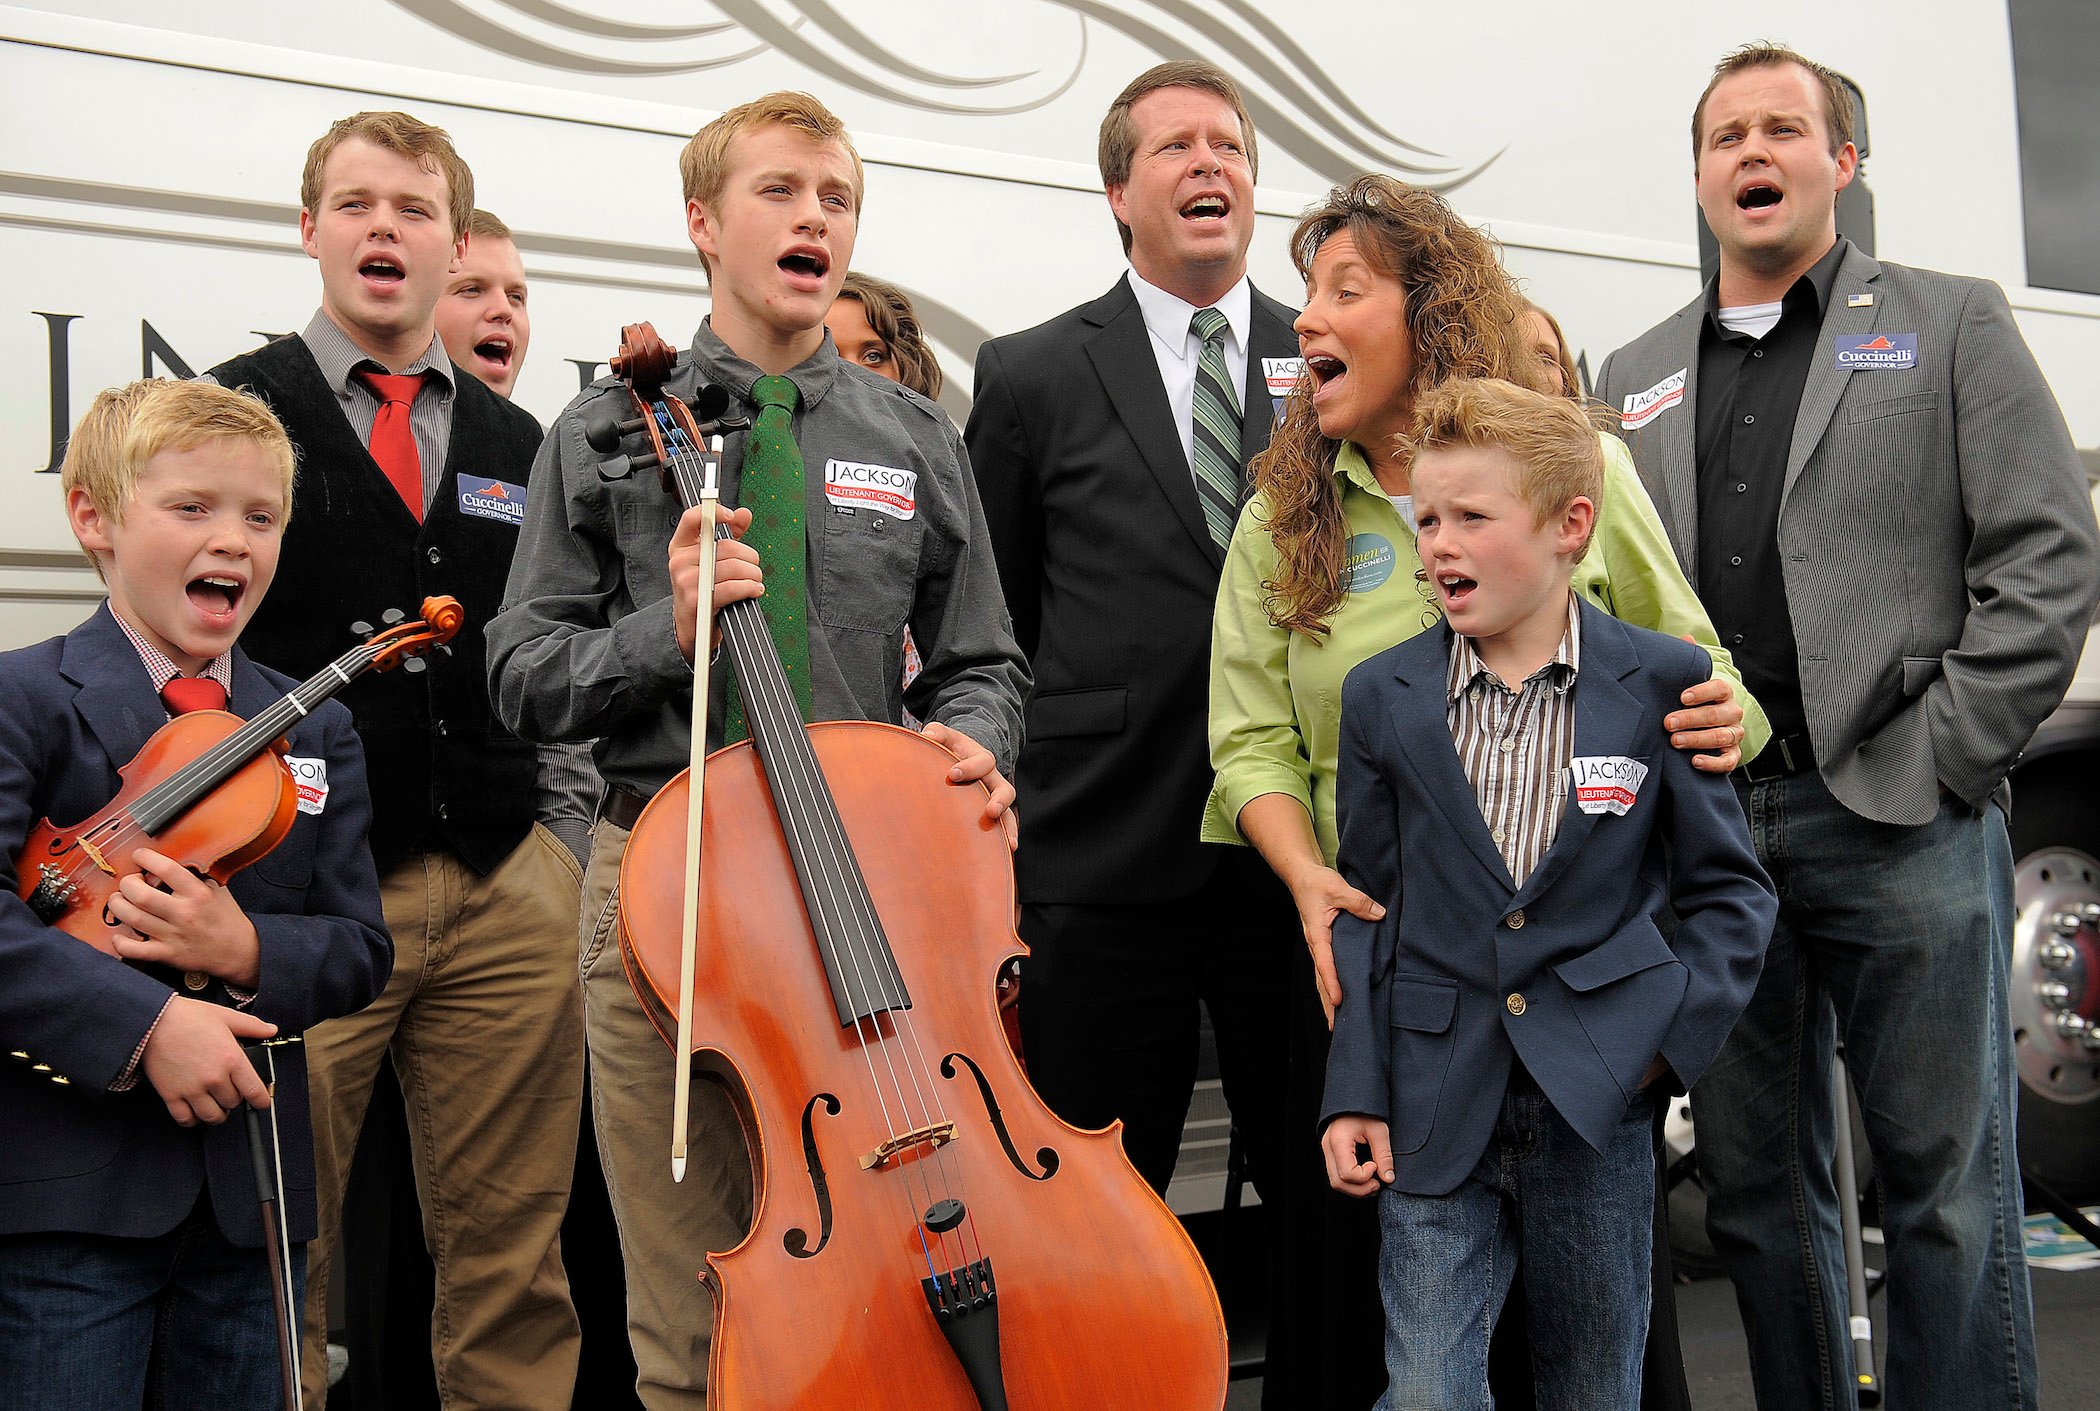 The Duggar family singing and standing together with instruments after they make a stop on their 'Values Bus Tour'